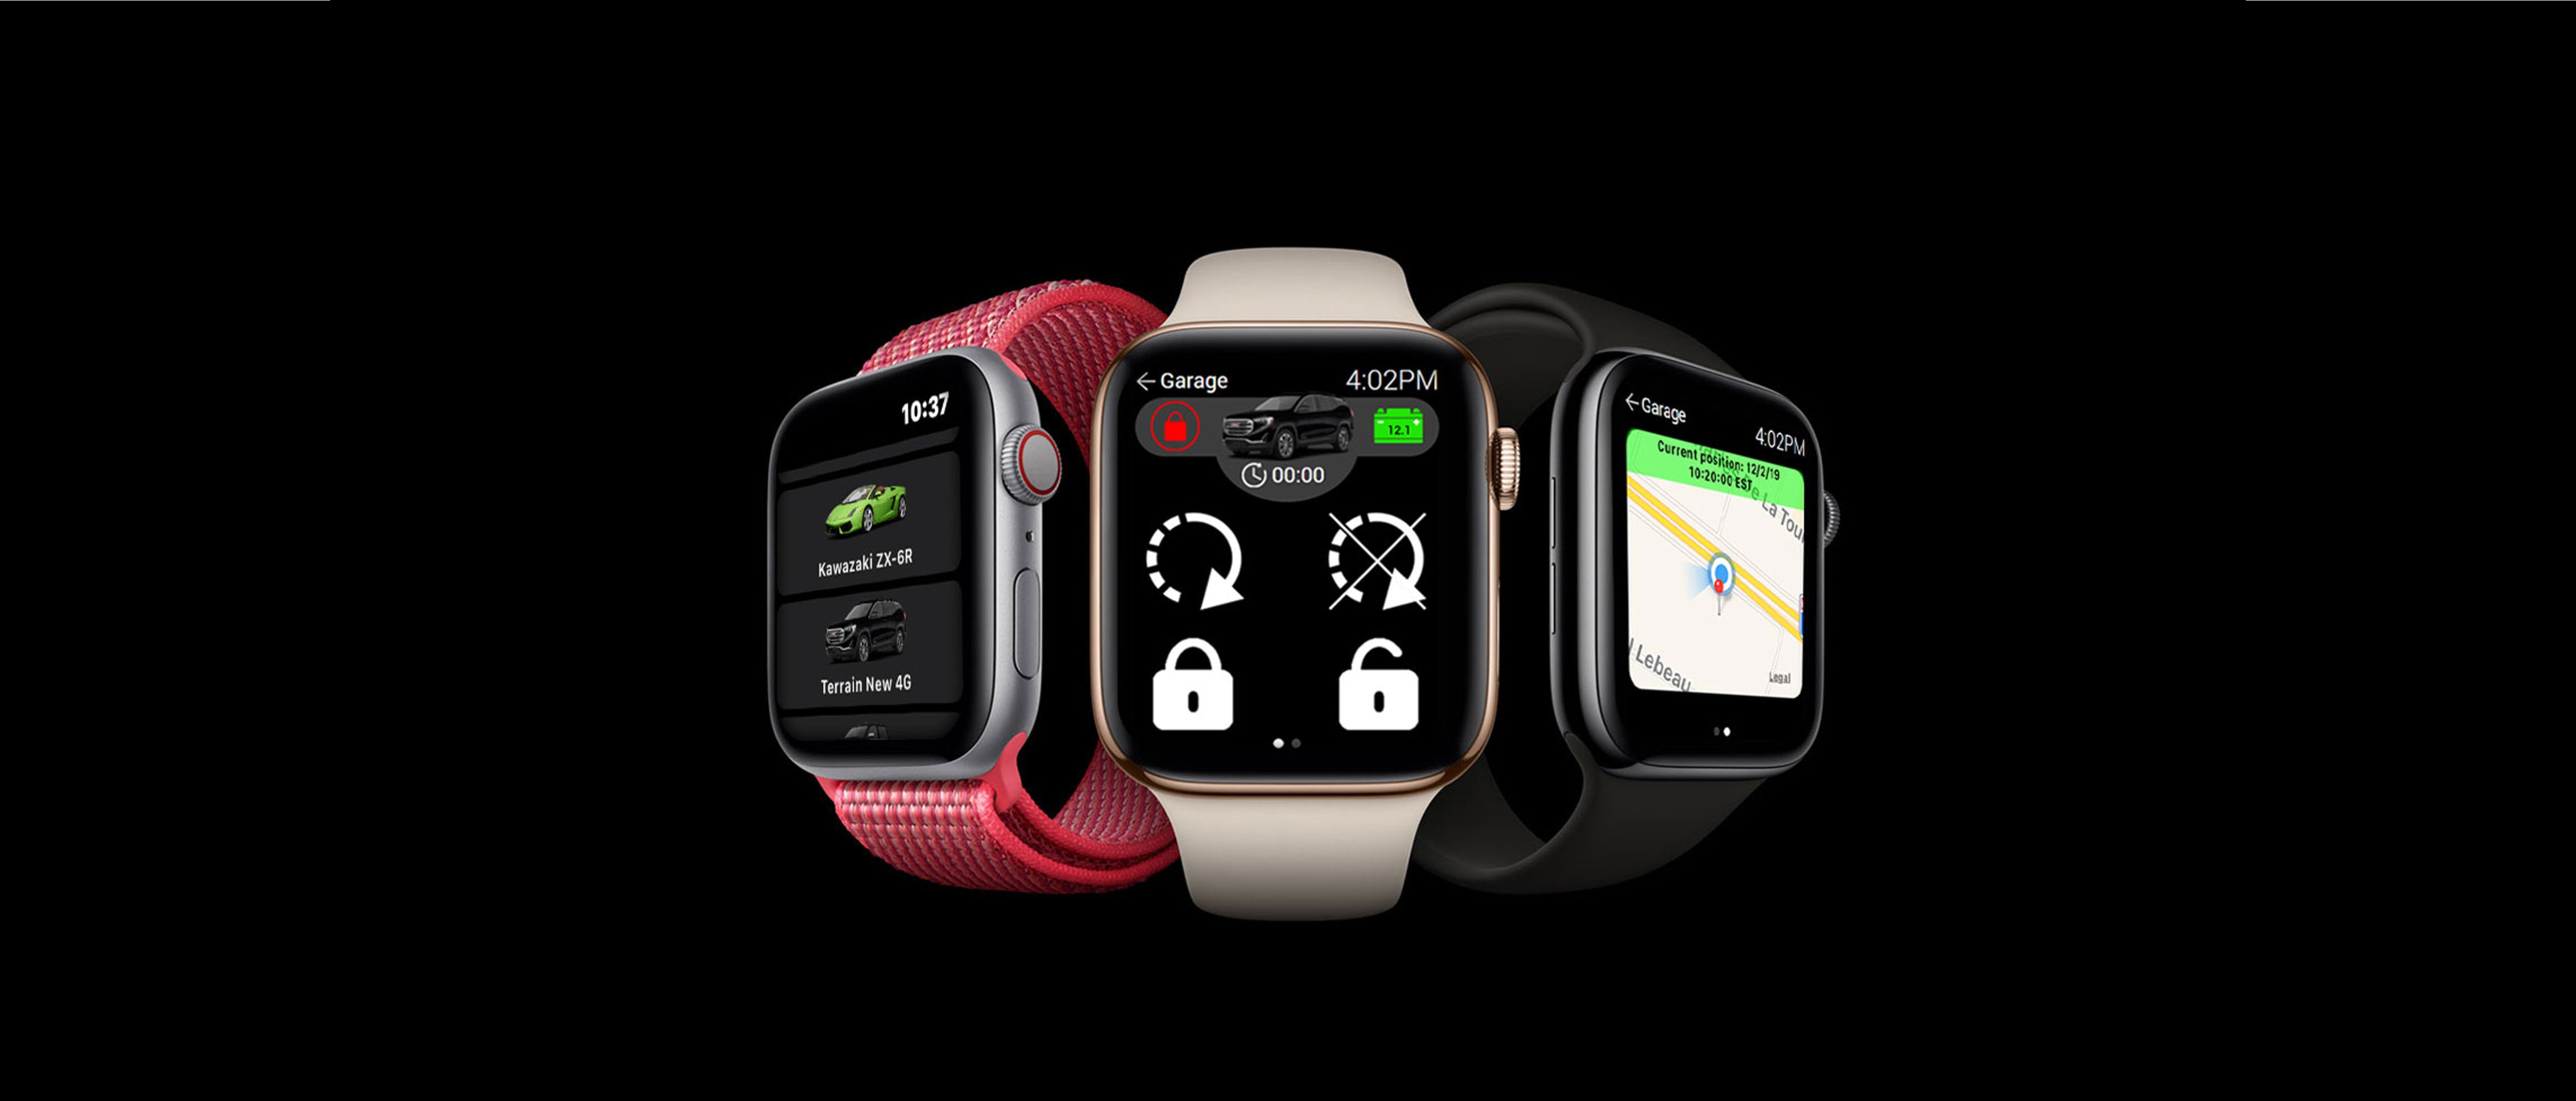 MyCar Smartphone App/Apple Watch App (Additional Equipment Required for Remote Start)